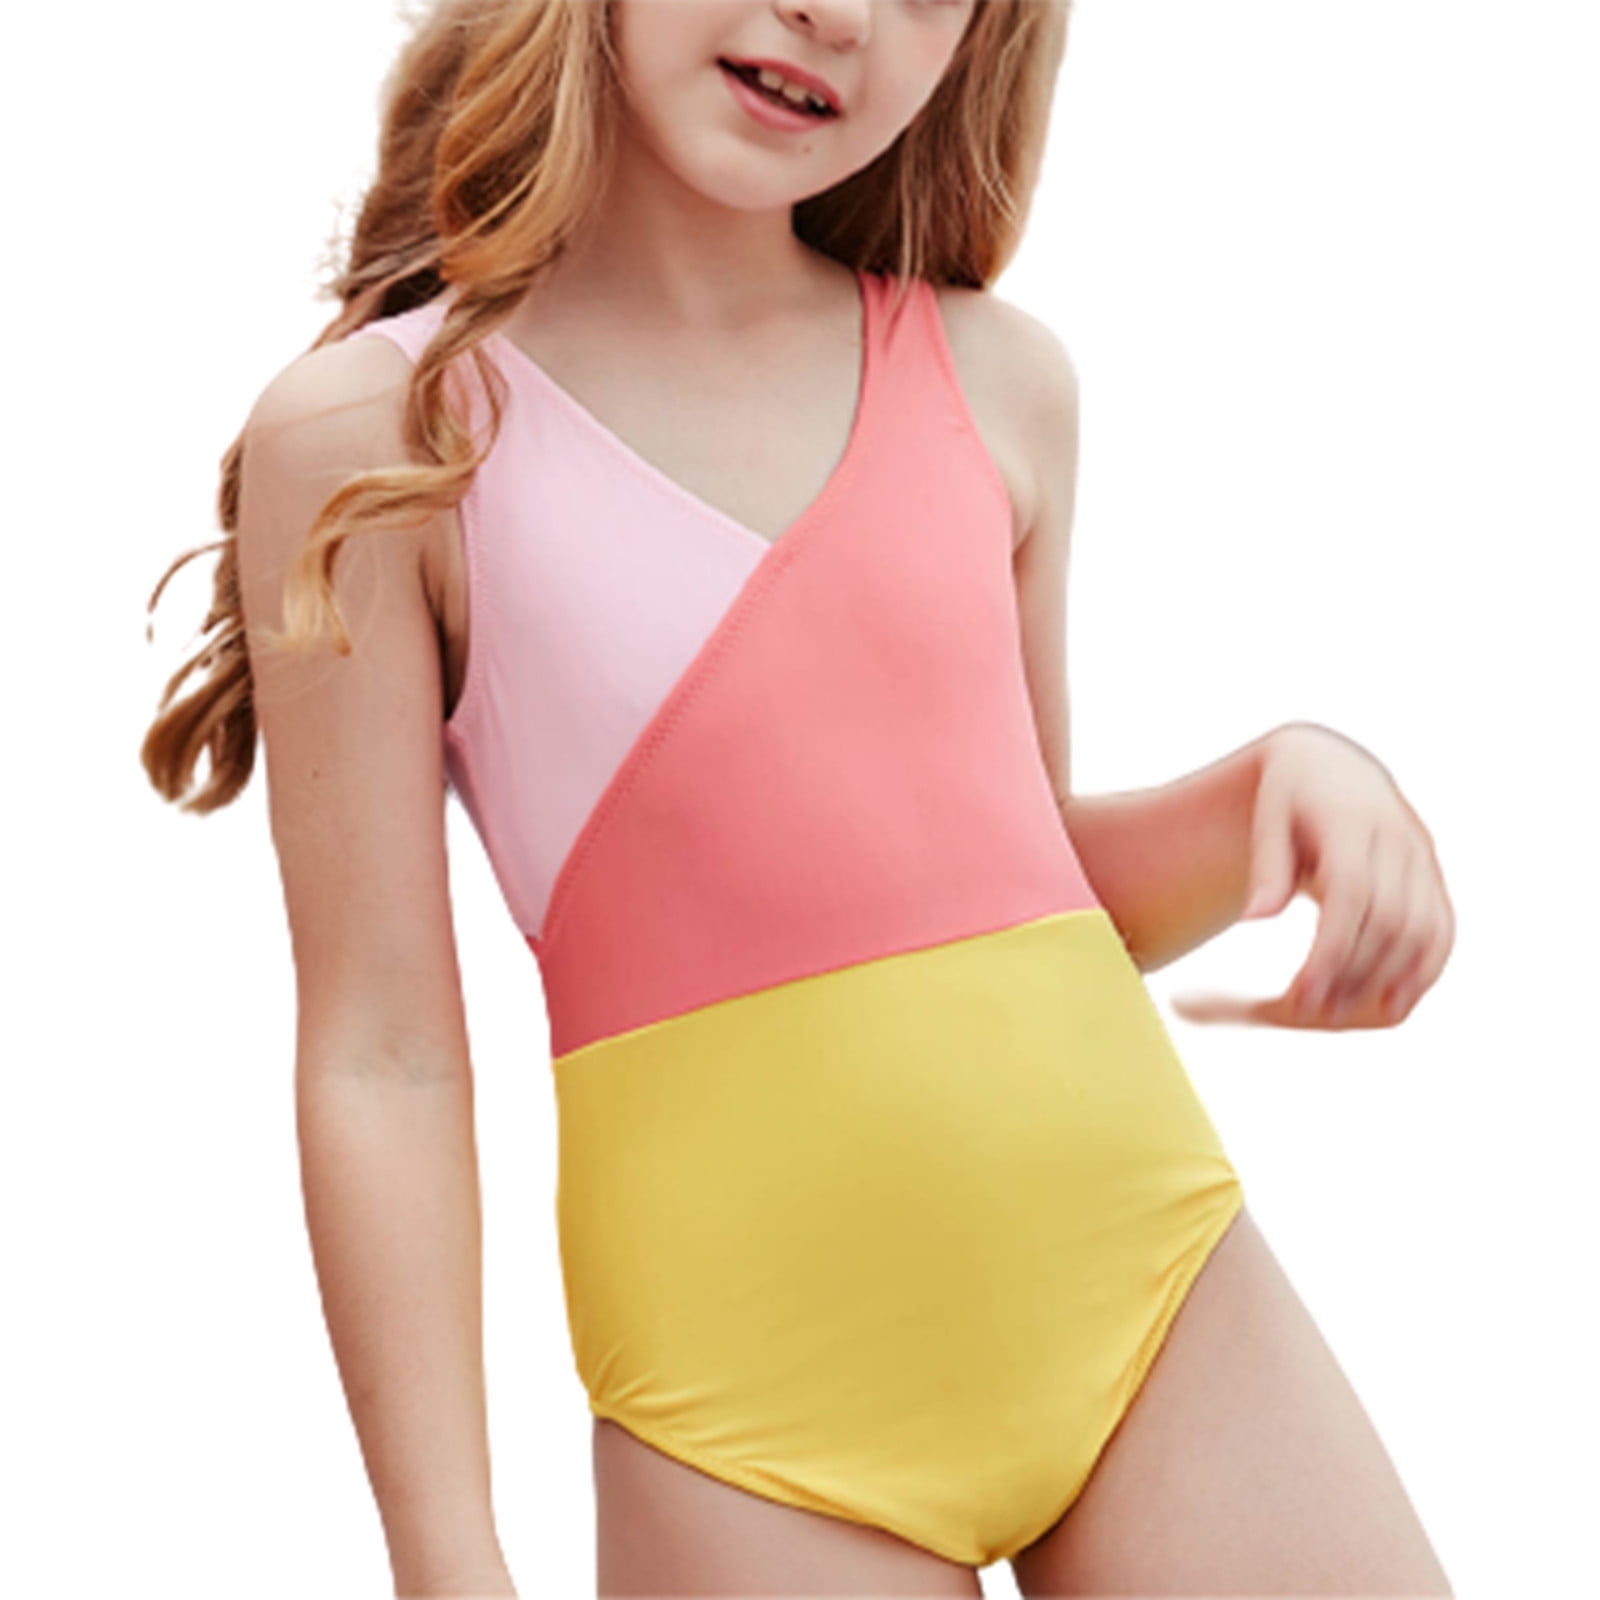 Cathalem Girls One-piece Swimsuits Daisy Swimsuit Piece Bathing Set  Swimsuit Girls Bikini One Cute Holiday Solid Suit Girls Swimsuit for Kids  Girls